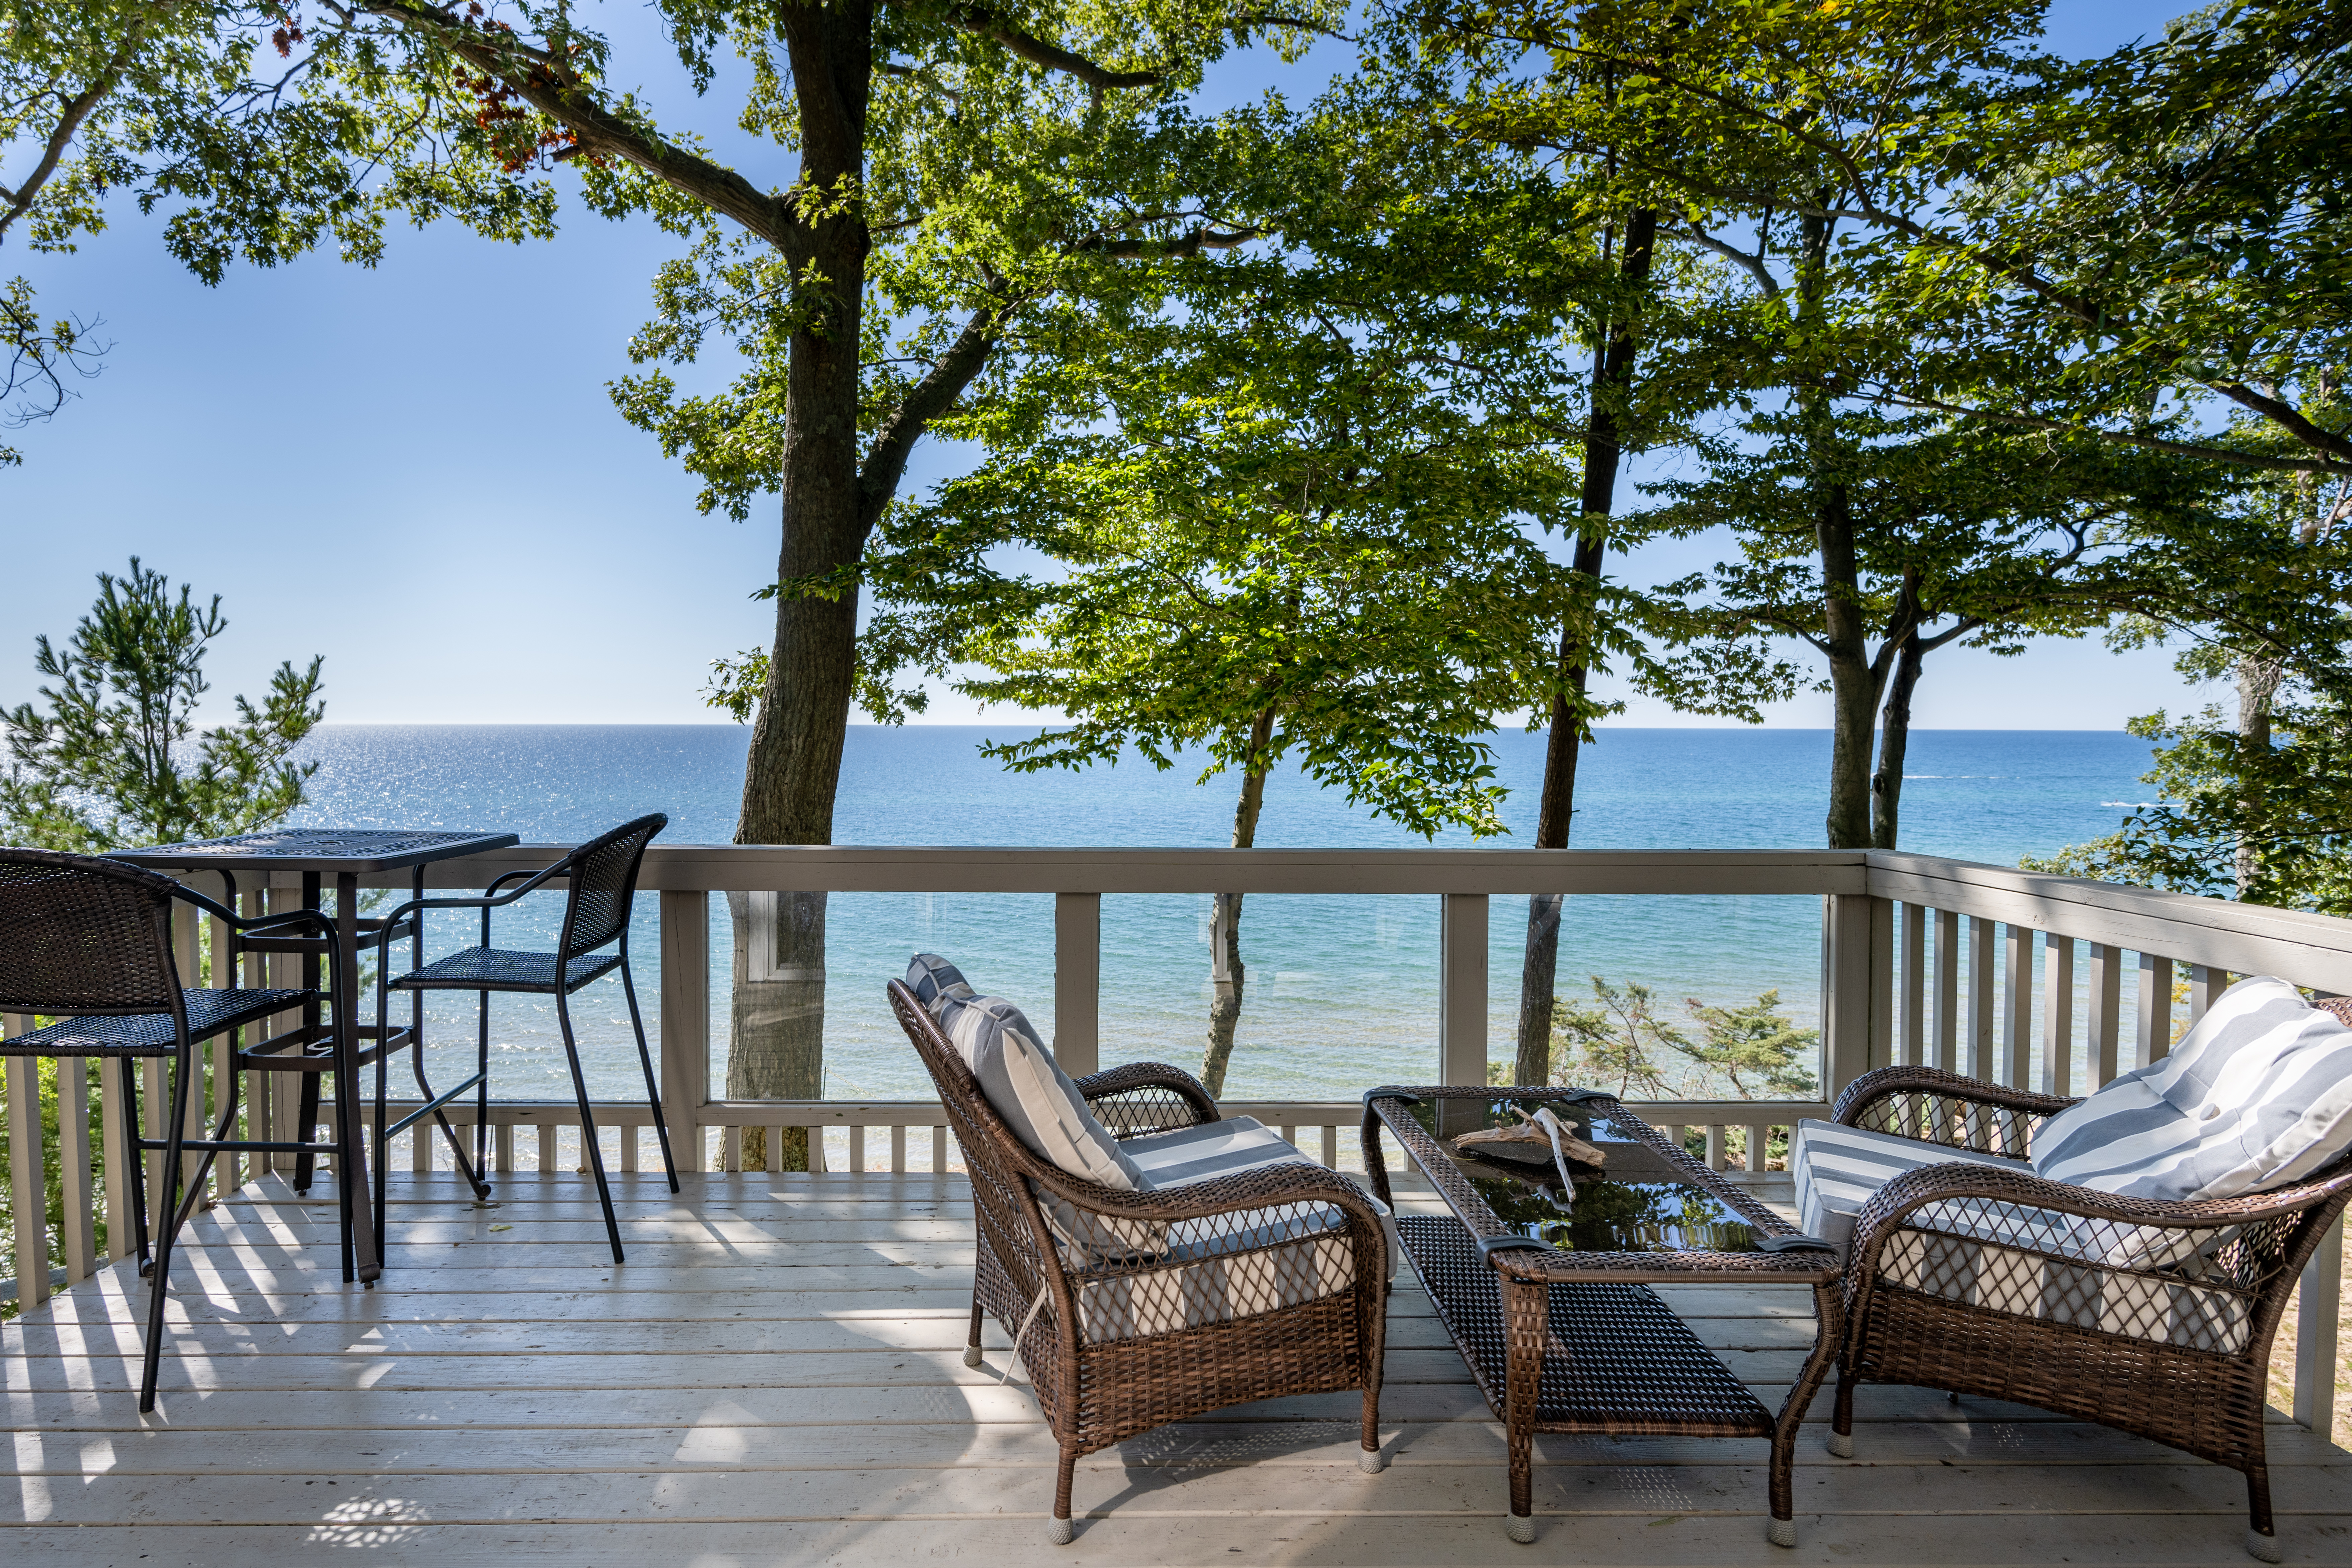 This home is the perfect vacation destination with Direct Lake Michigan access and breathtaking views!